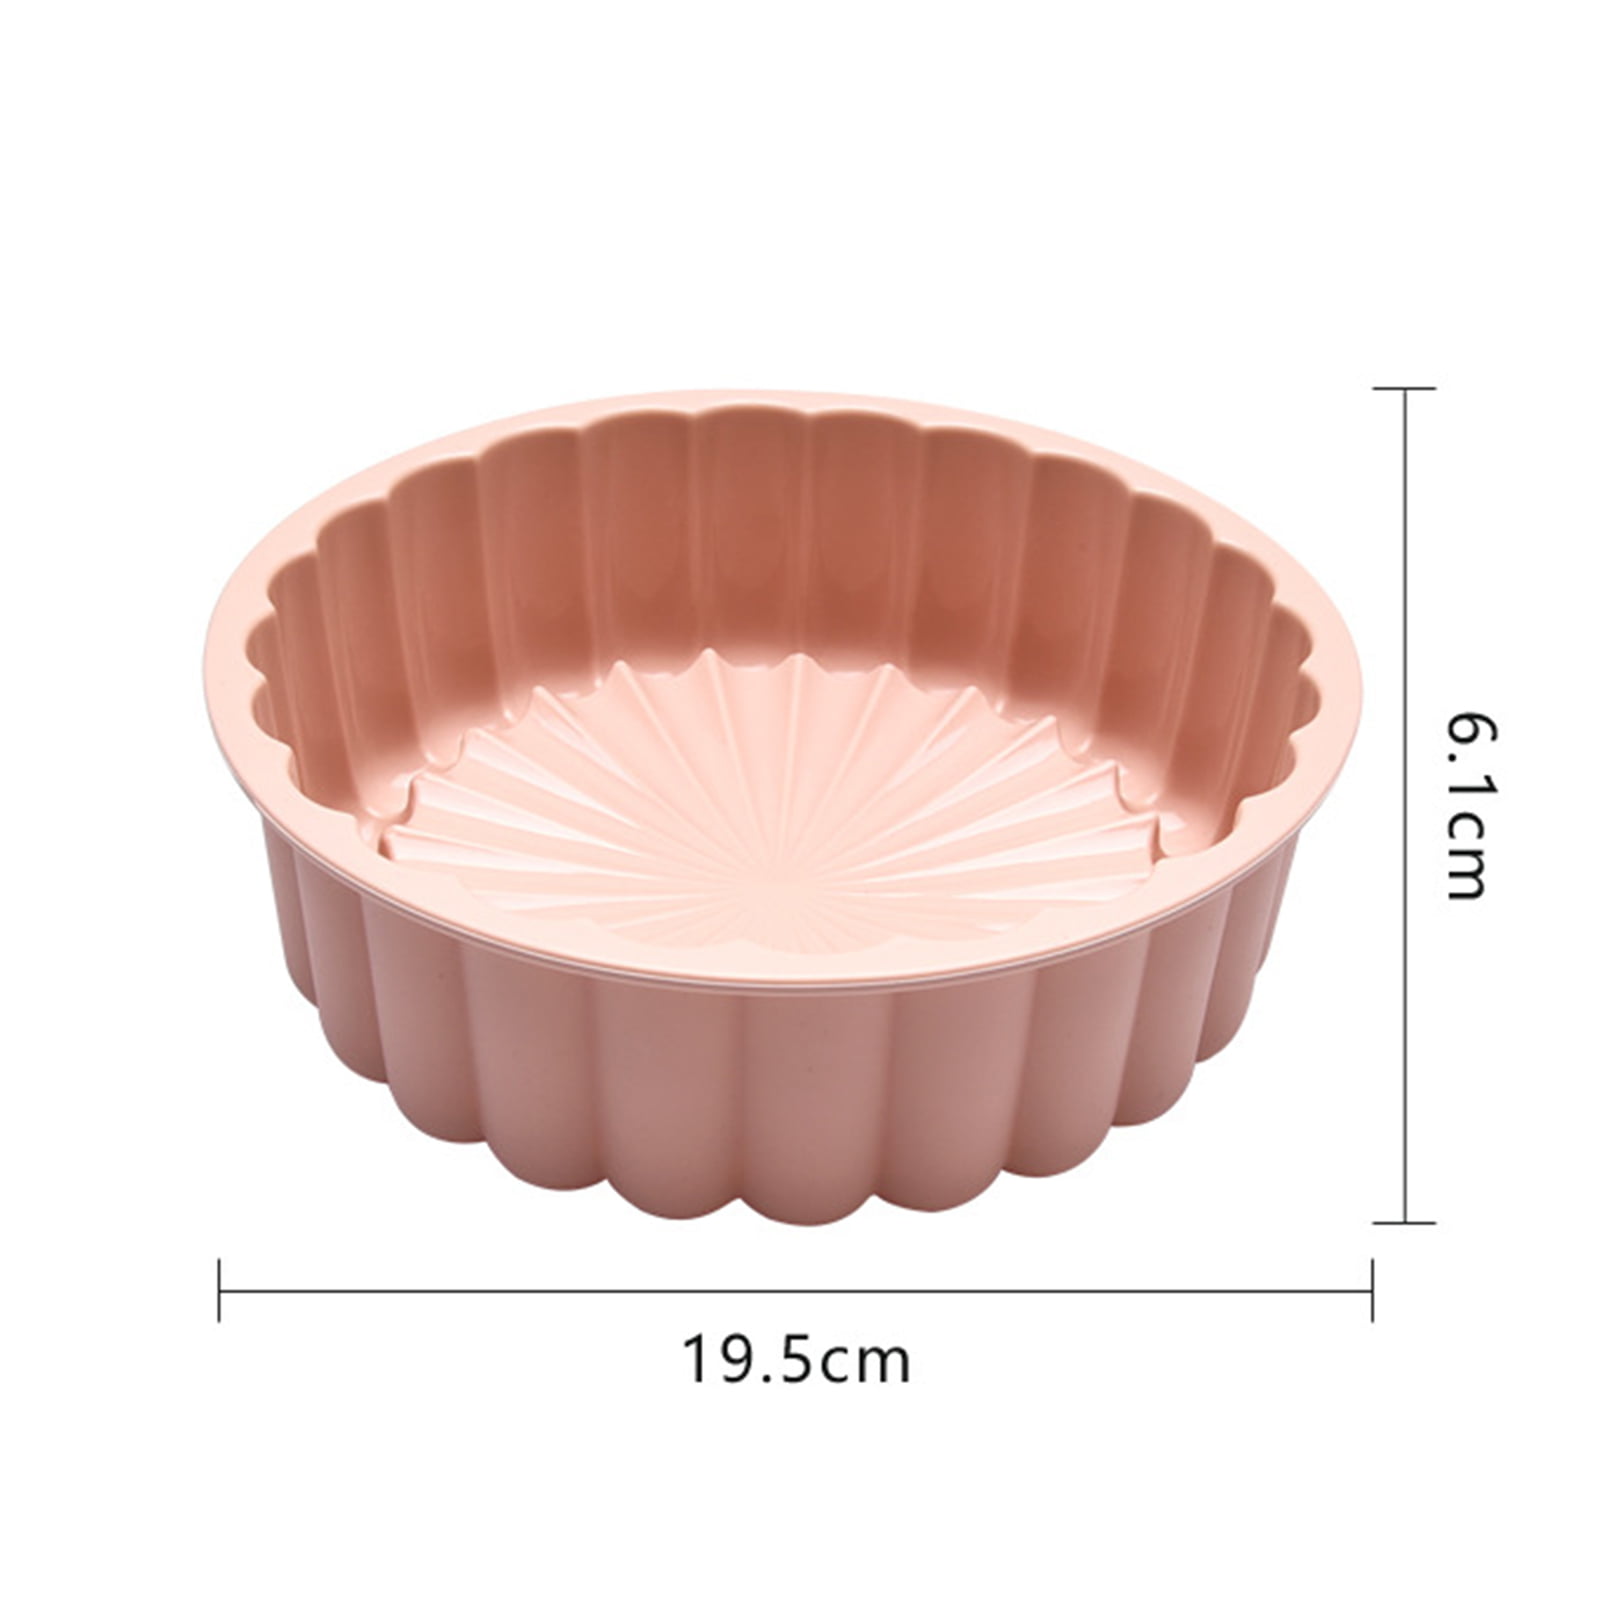 Shenmeida Silicone Cake Mold Pan, Large Round Bread Pie Flan Tart Mold,  Sunflower Shape Non-Stick Baking Trays for Birthday Party DIY 